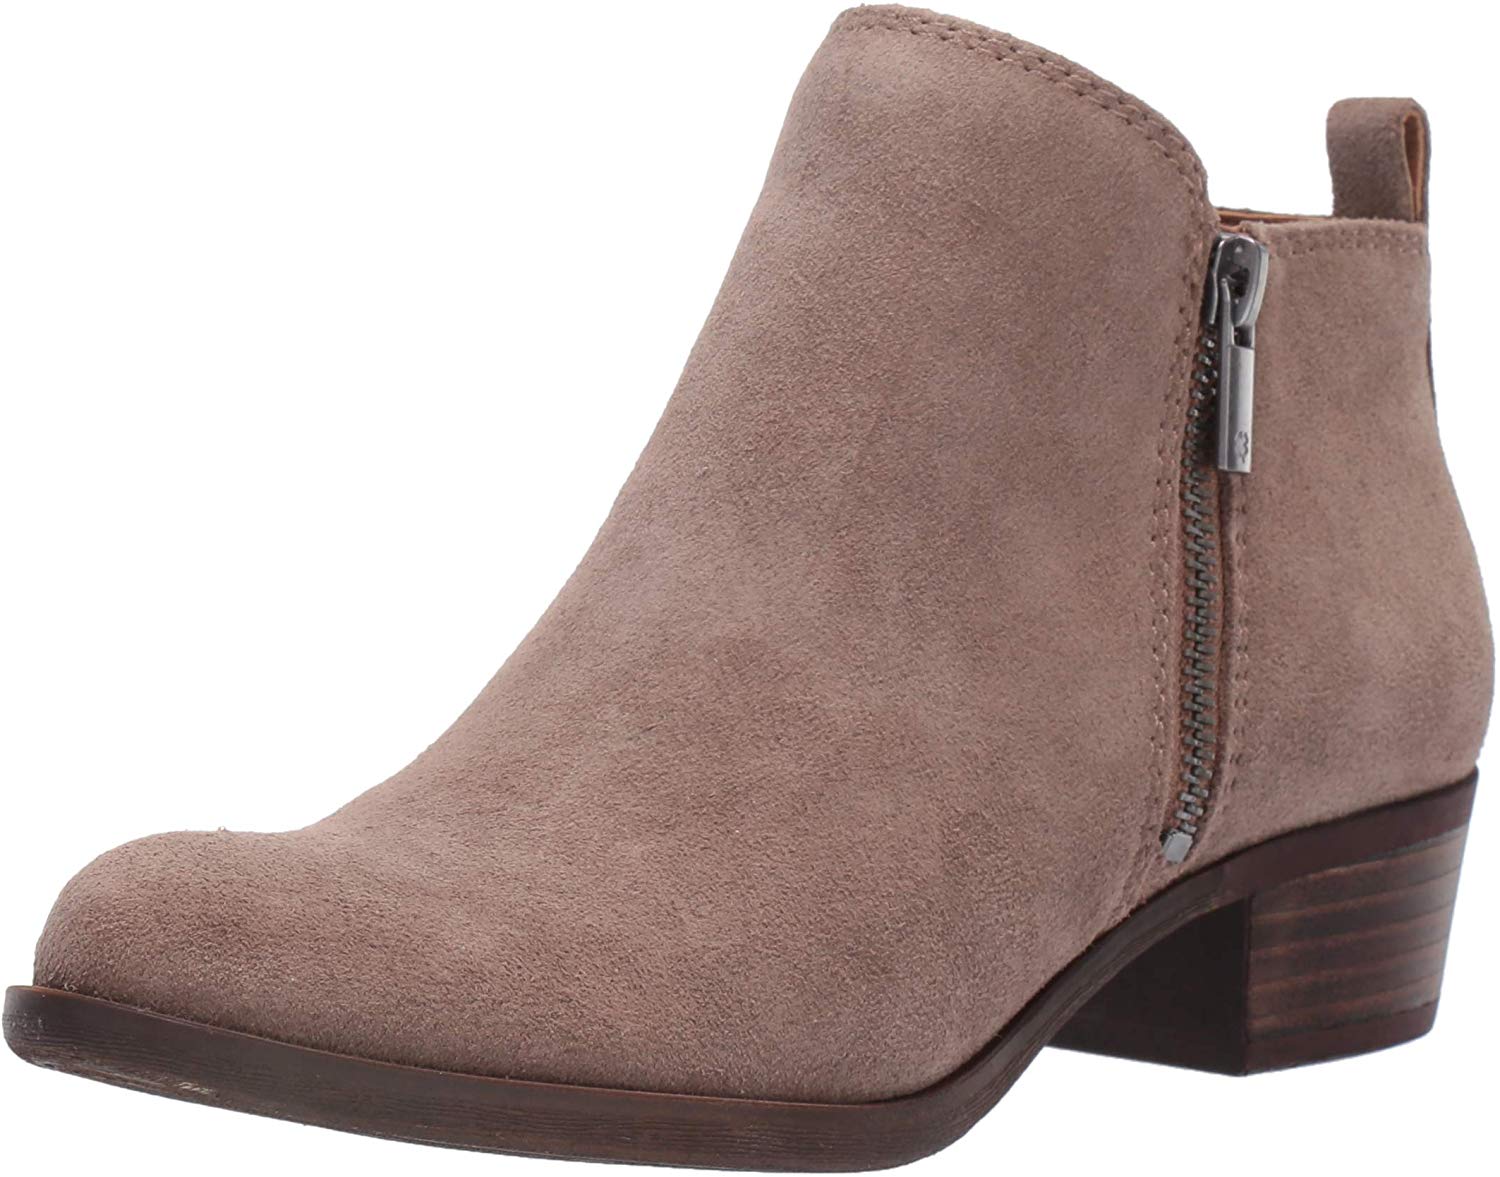 taupe suede booties